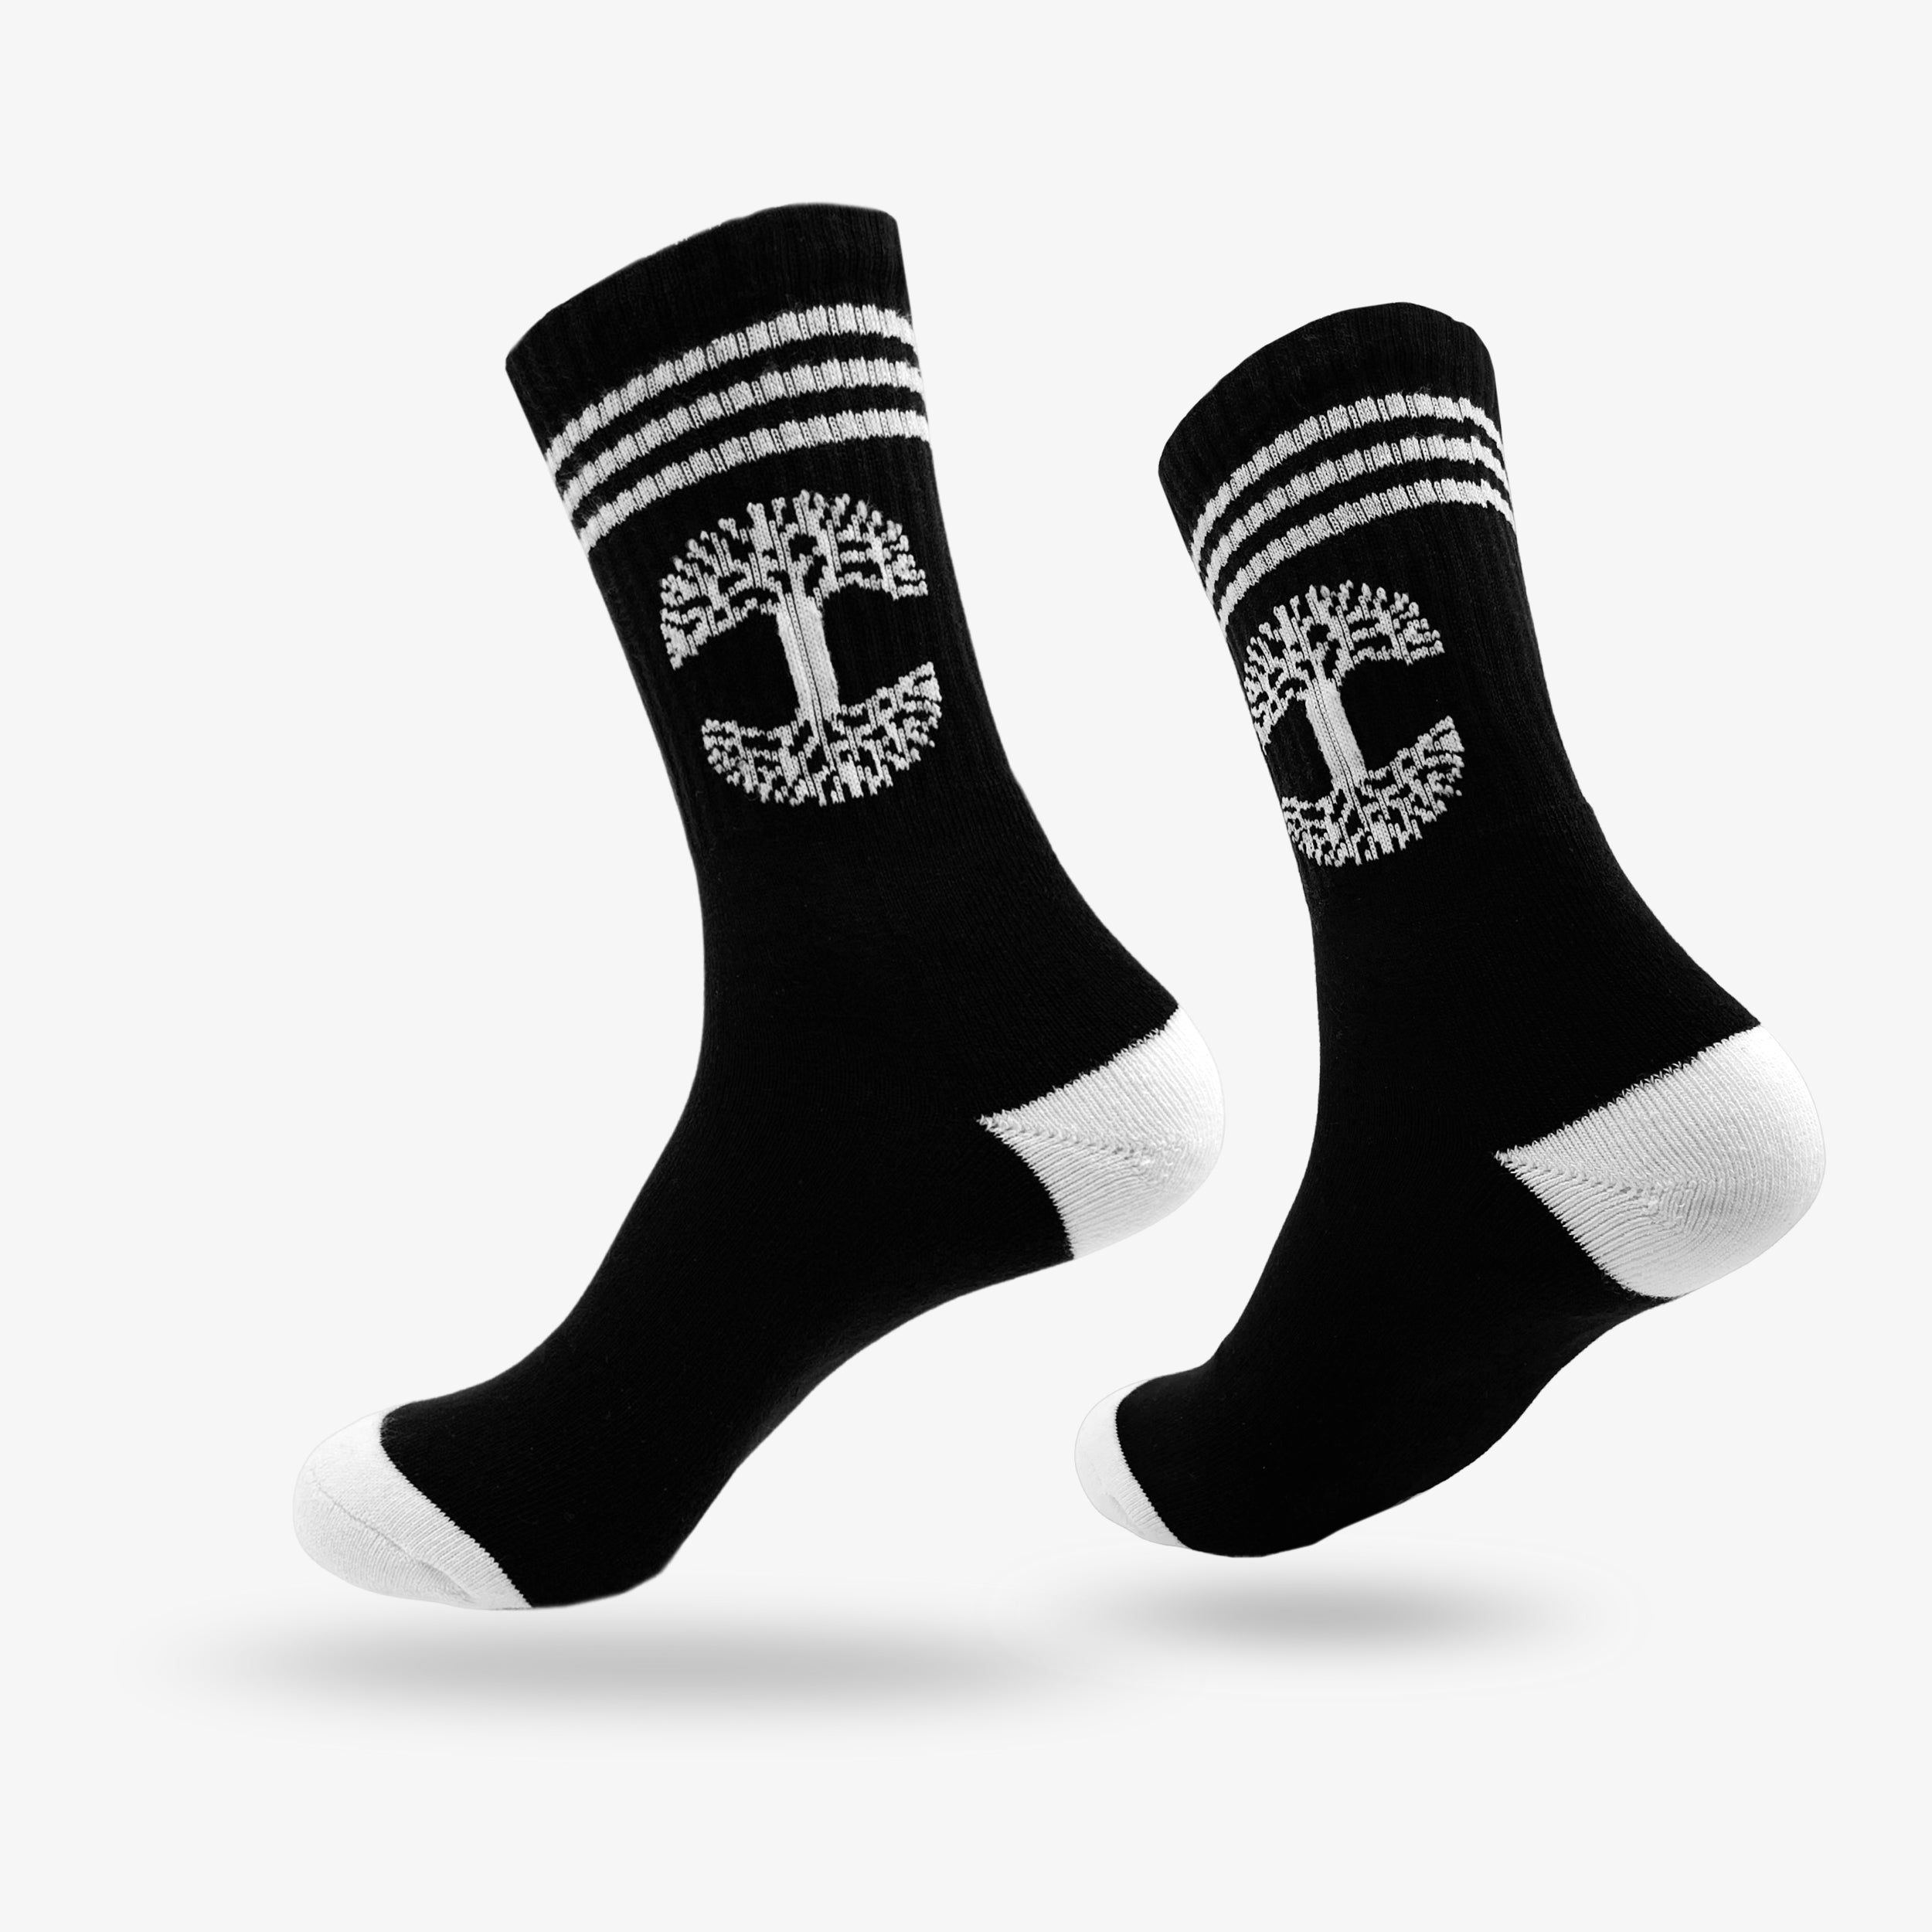 Black crew socks with white heel and toe and white Oaklandish tree logo under white ankle stripes.